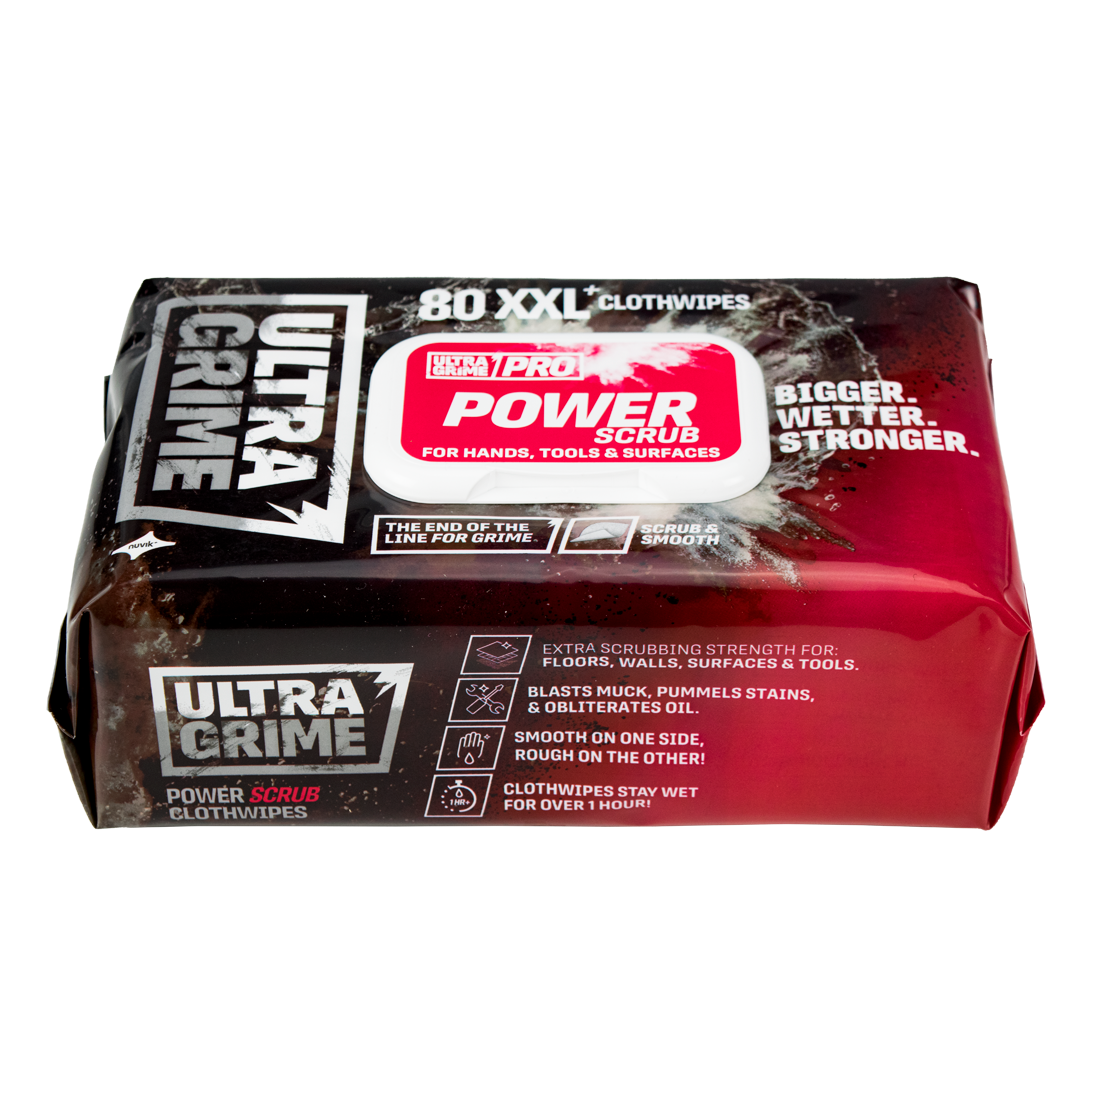 UltraGrime Pro Power Scrub Cleaning Wipes Pack of 80